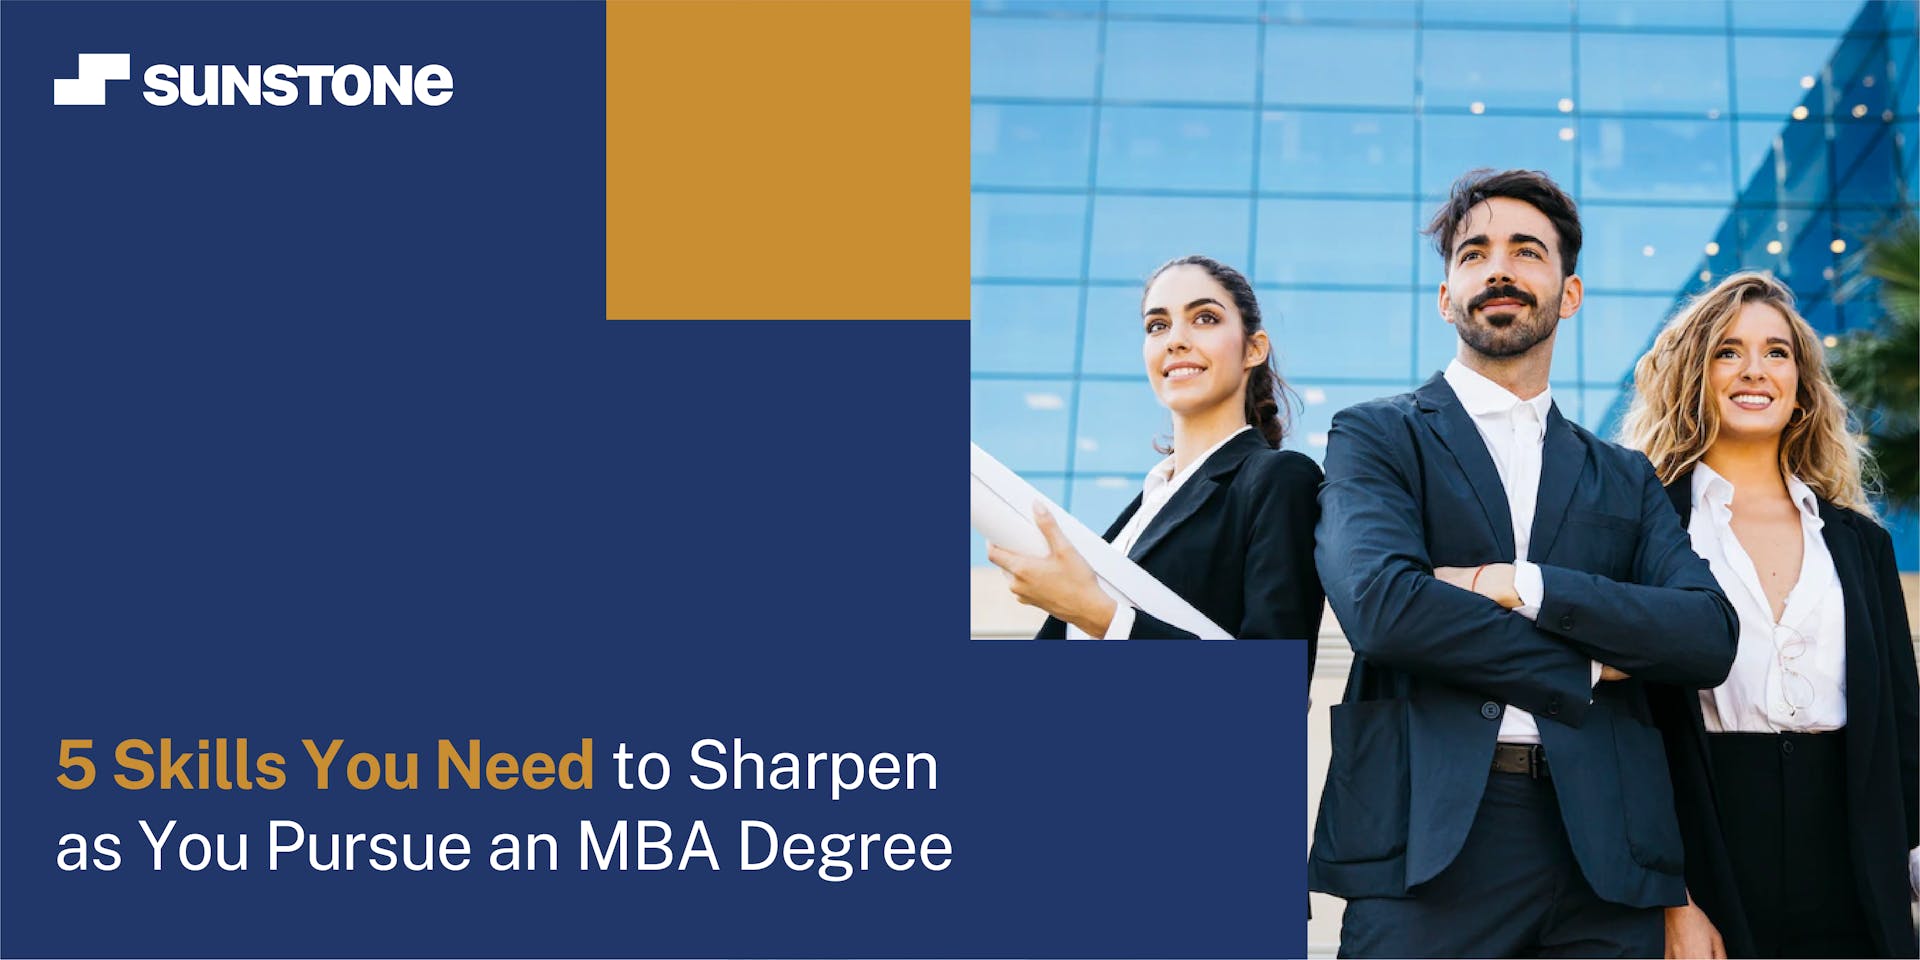 5 Skills You Need to Sharpen as You Pursue an MBA Degree